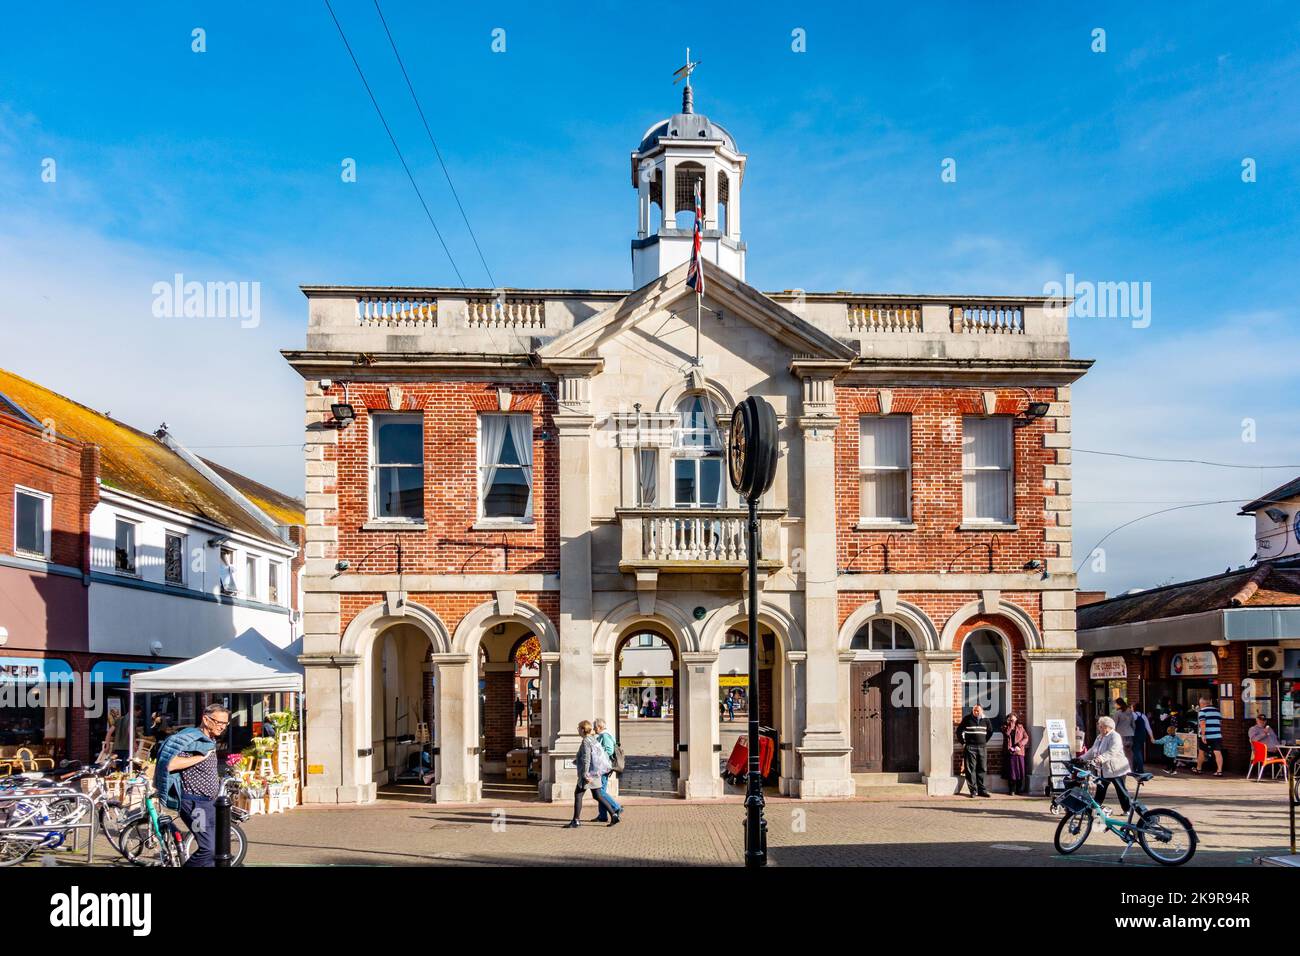 The Old Town Hall on High Street, Christchurch in Dorset, UK with stone pillars and a red brick facade. Stock Photo